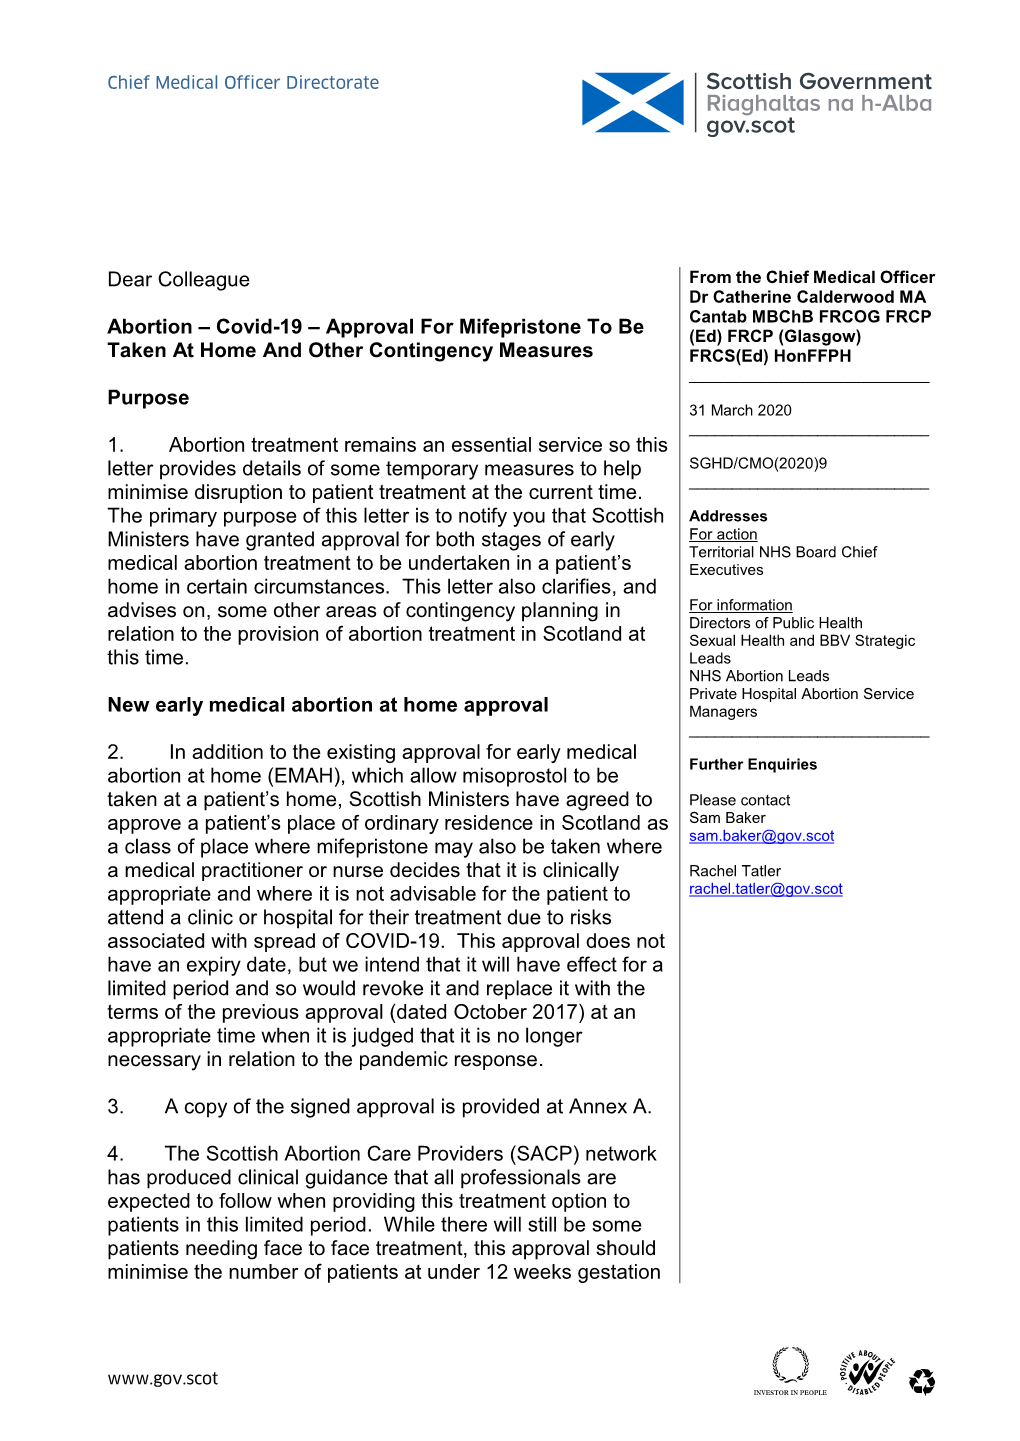 Abortion: Covid-19: Approval for Mifepristone to Be Taken At